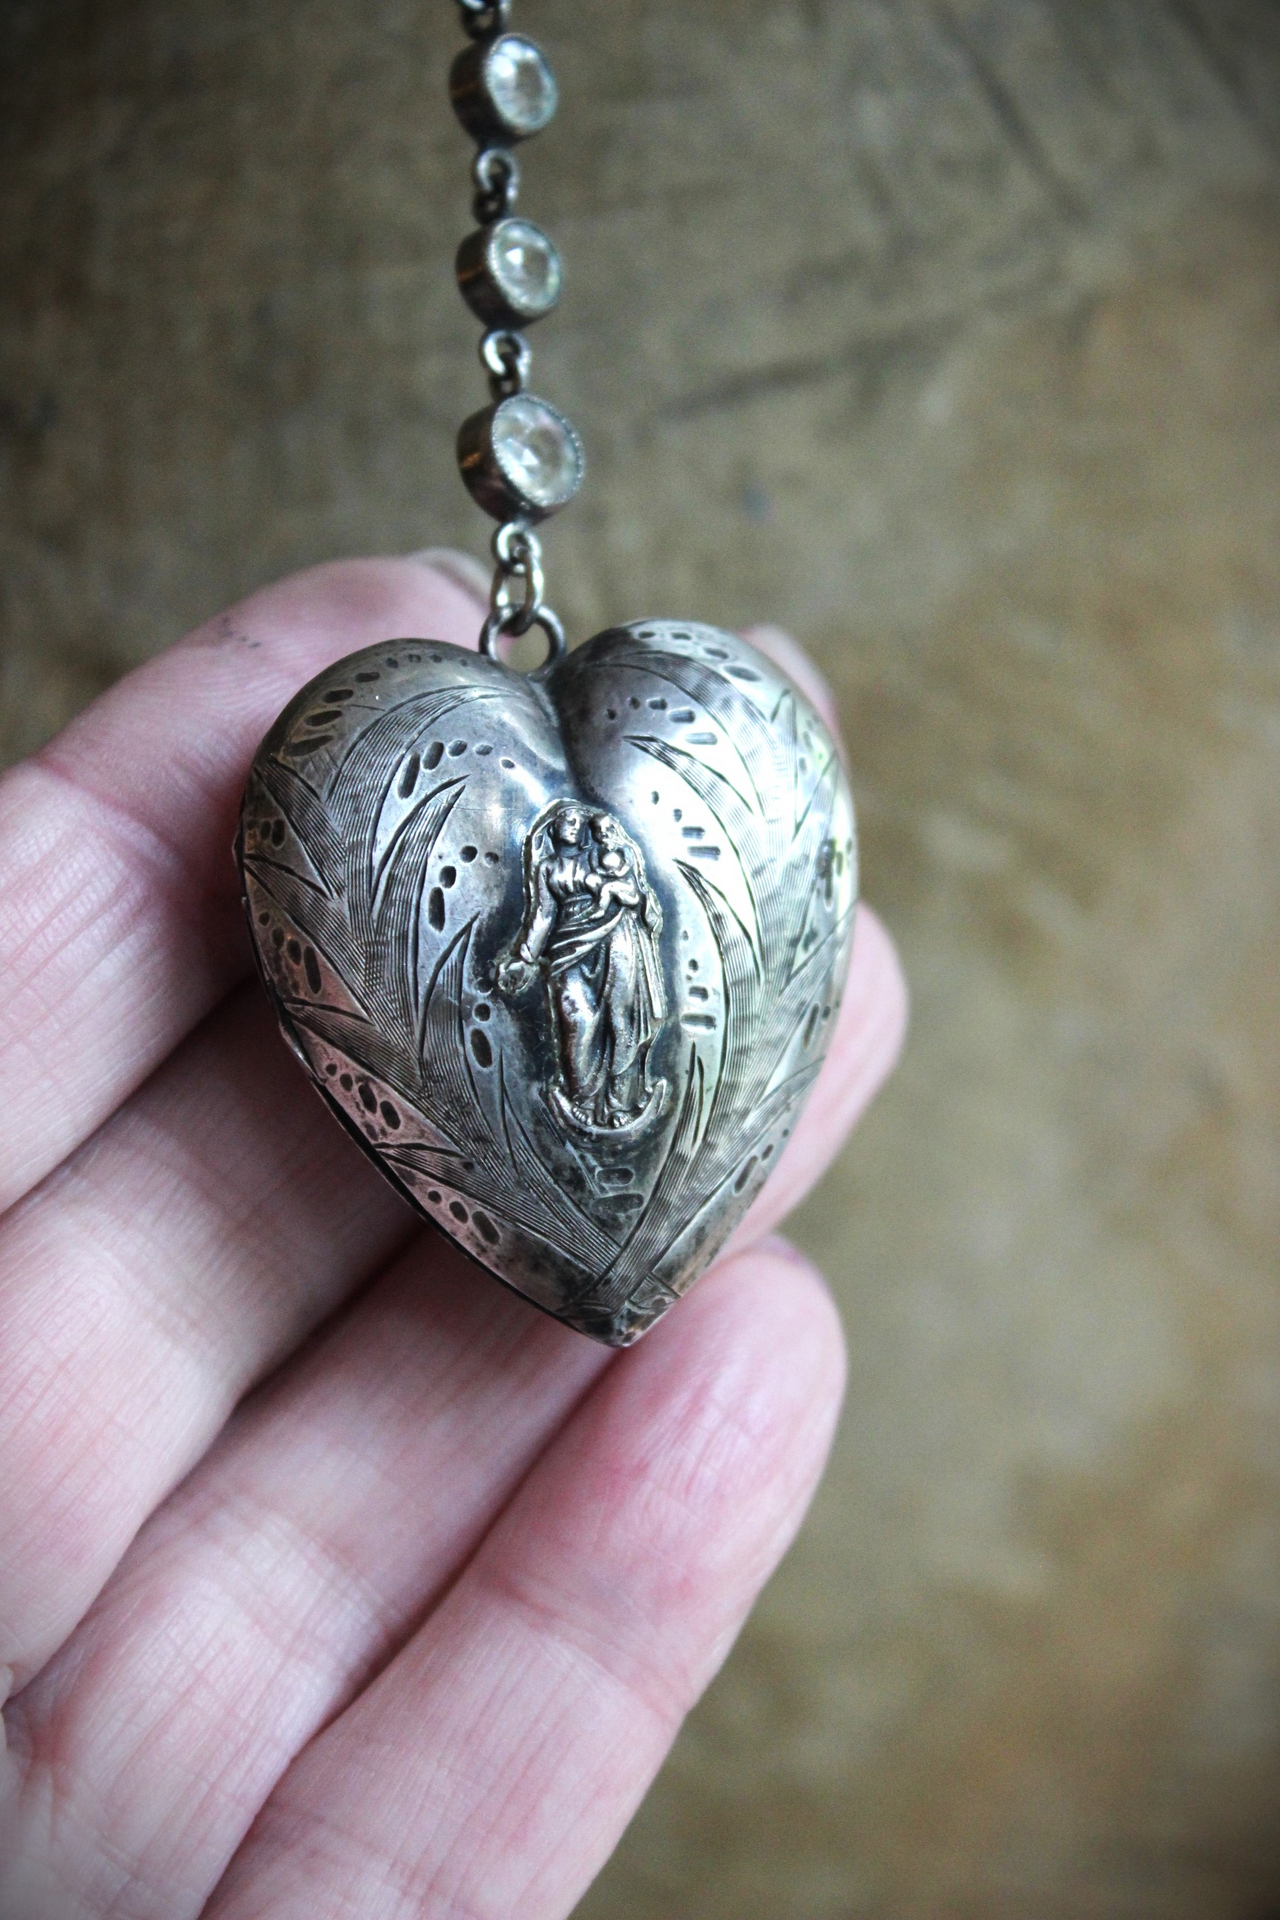 NEW! Rare Antique French Sterling Petit Ex Voto Locket with Figural Madonna & Child, Antique Bezel Set Faceted Crystals,Sterling Rolo Chain & Clasp